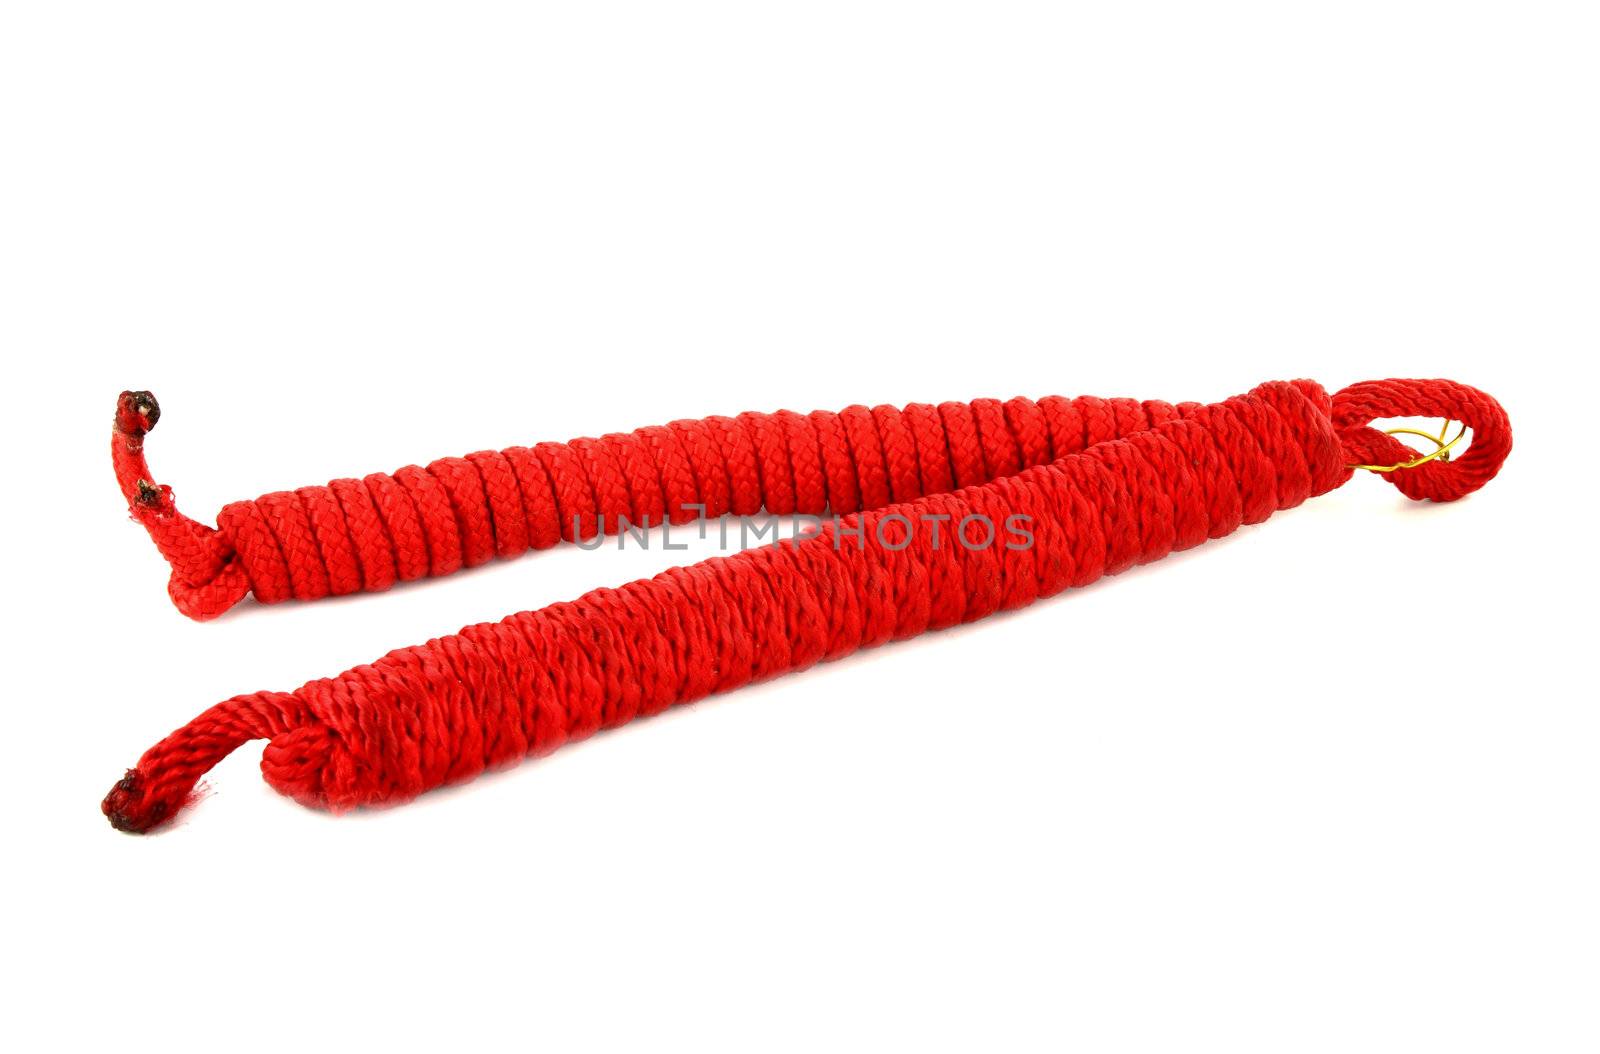 red climbing rope isolated on white background